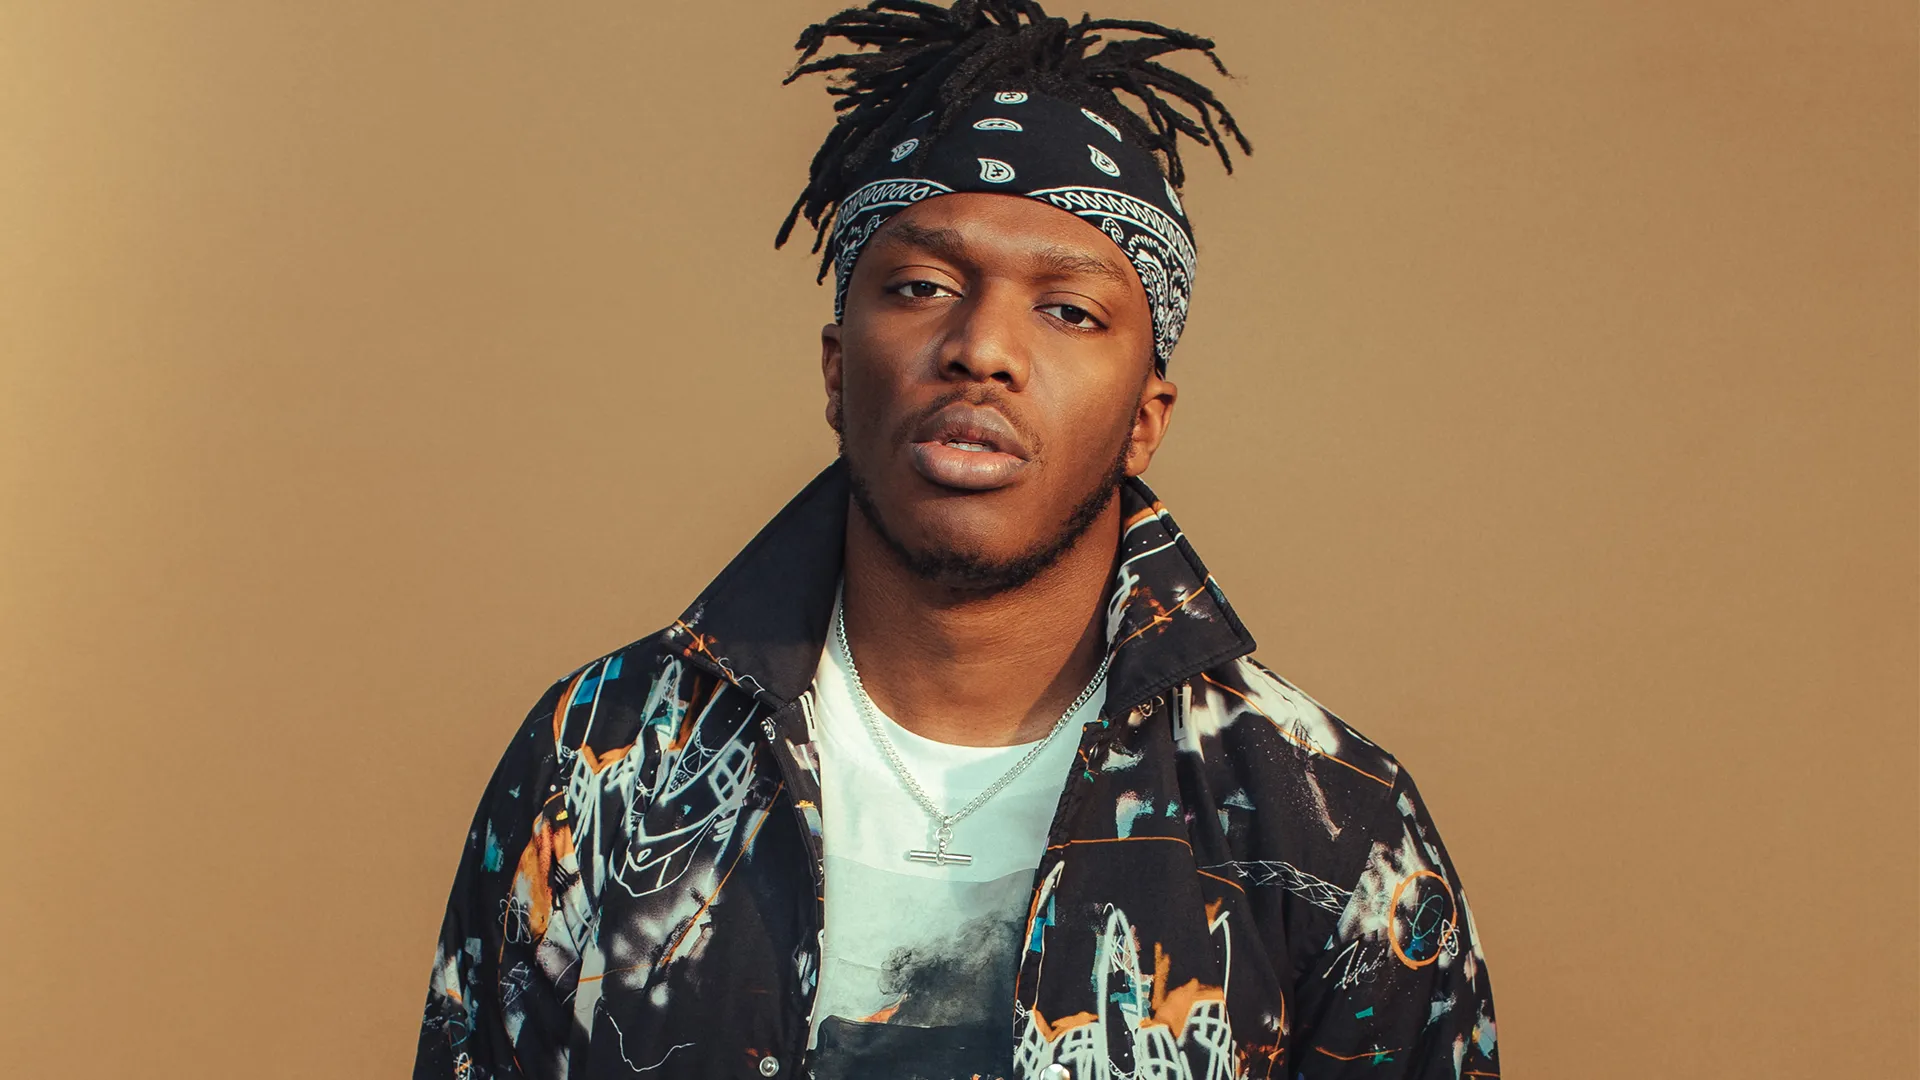 Check: KSI Loses Twitter Blue Tick, Fans Hilariously React- 'You Are Broke/ Who Are You?'